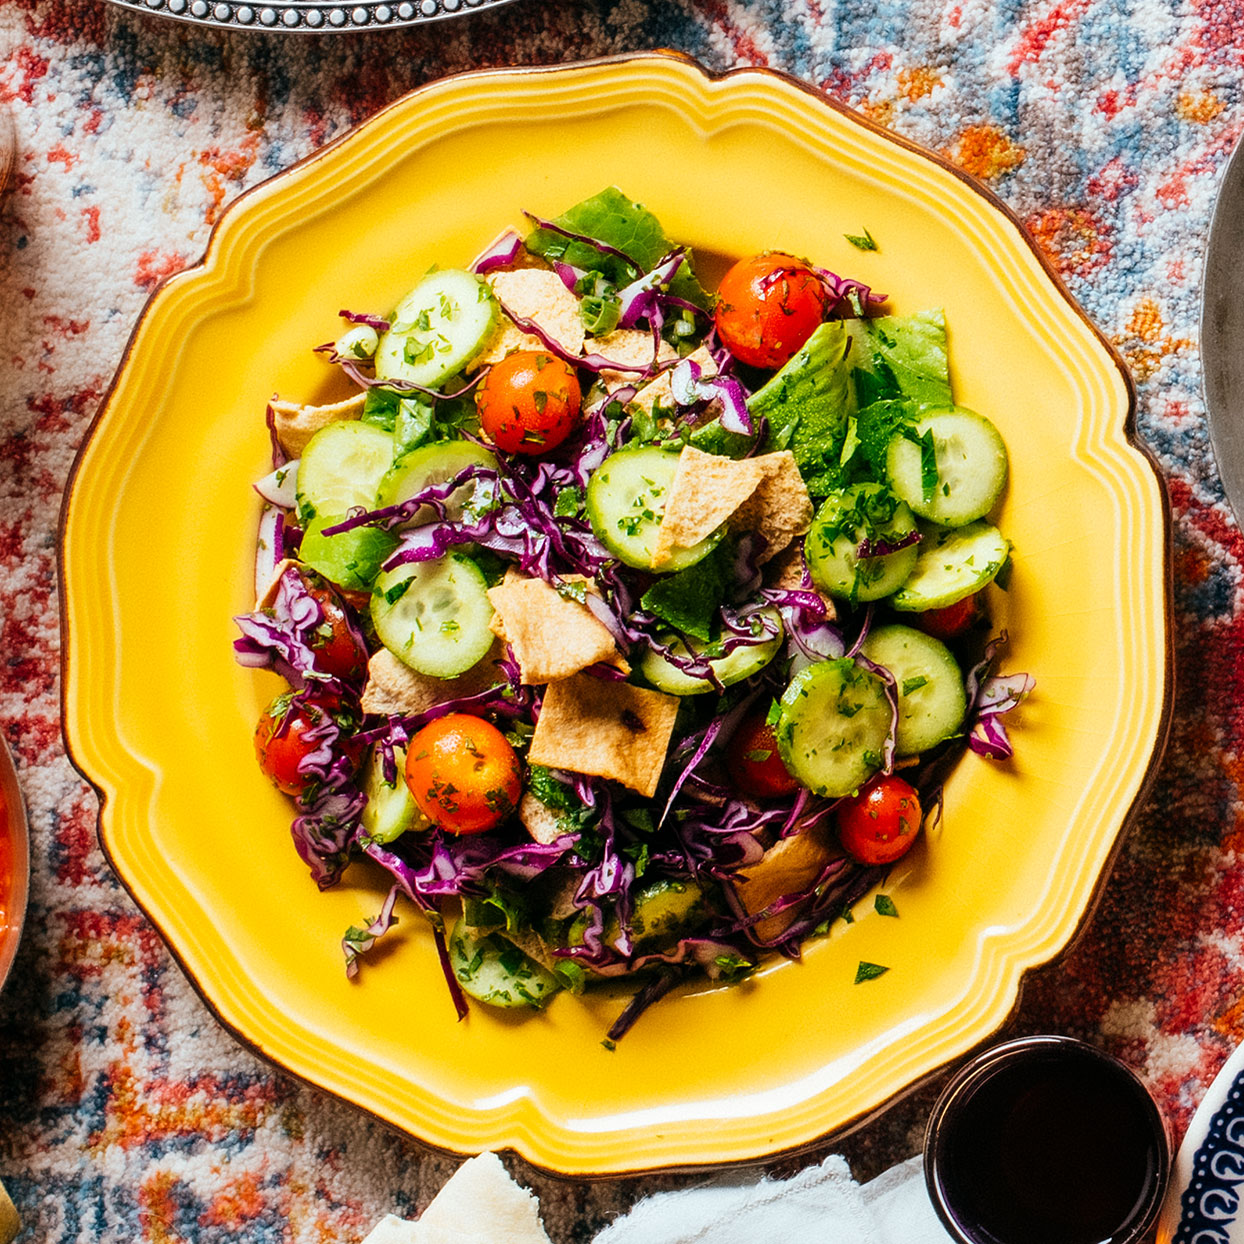 <p>Red cabbage gives this fattoush salad extra crunch. Recipe adapted from New Arrival Supper Club chef Maysaa Kanjo.</p>
                          